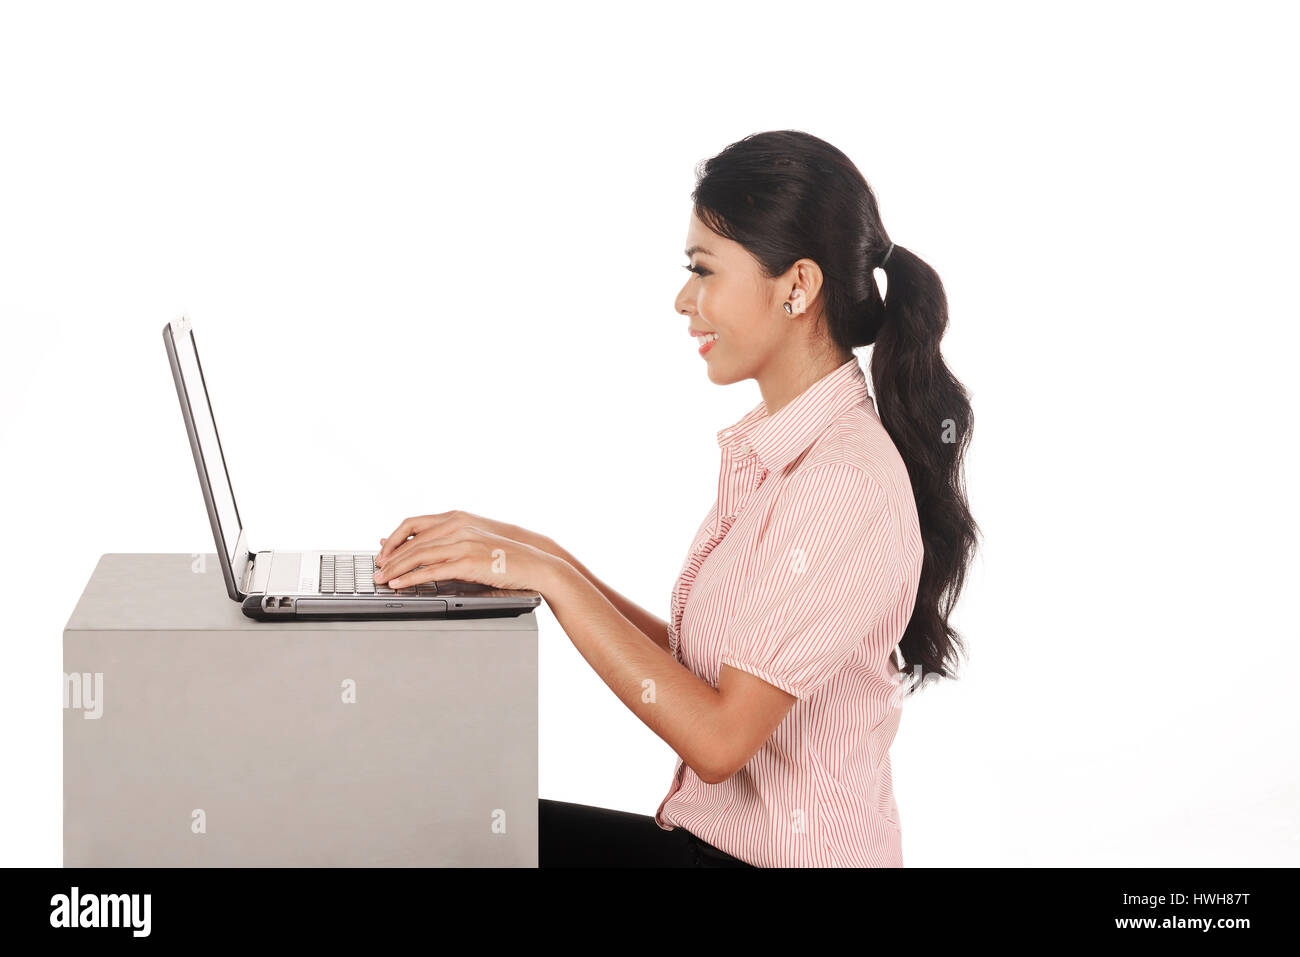 Business woman working on laptop isolated over white background Stock Photo